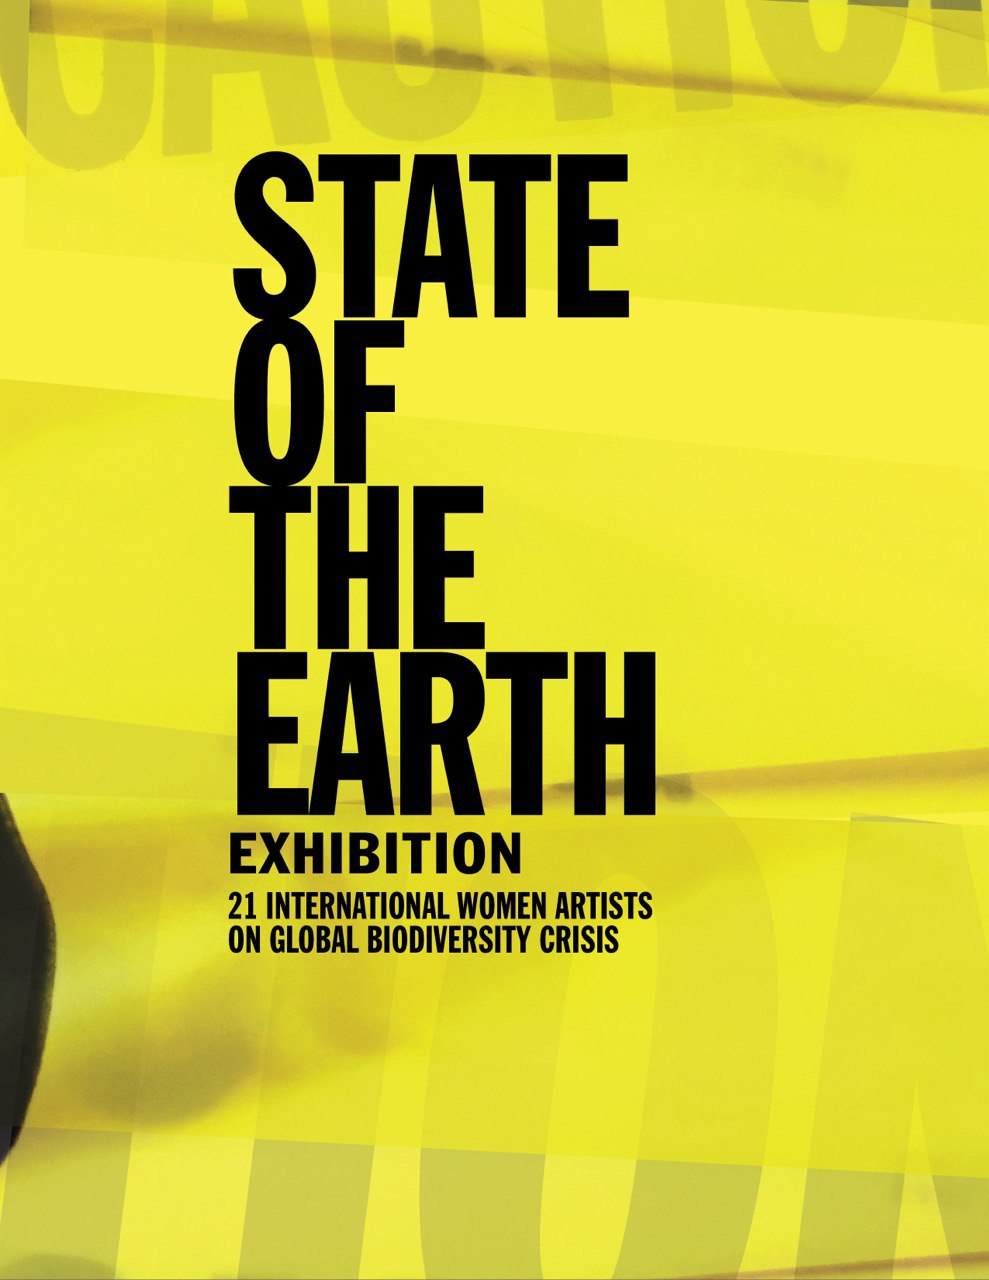 Interactive flipbook for State of the Earth catalogue